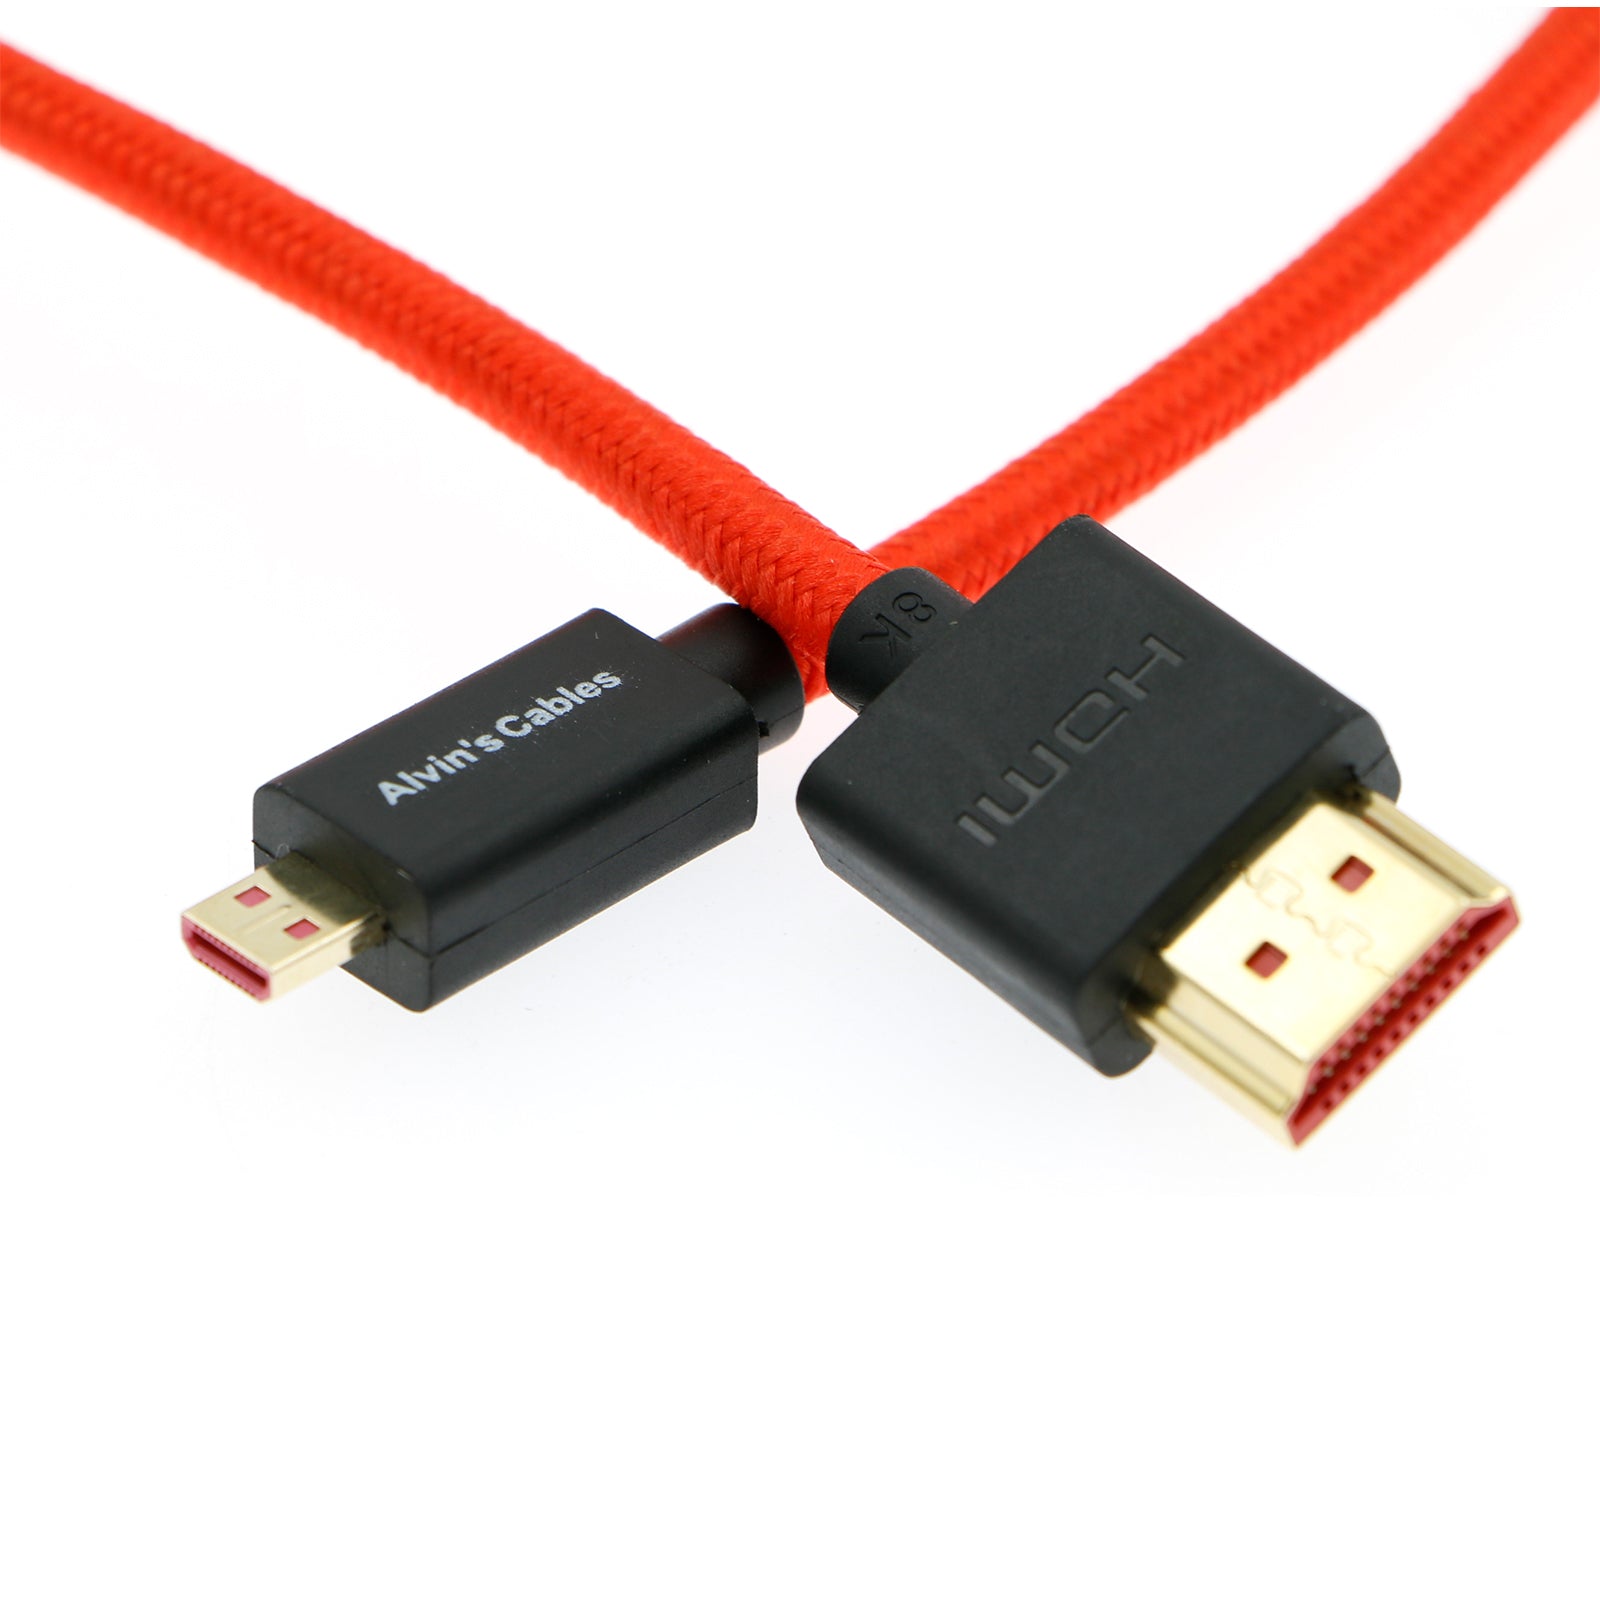 Alvin’s Cables 8K 2.1 Micro-HDMI to Full HDMI Cable for Atomos-Ninja-V 4K-60P Record 48Gbps HDMI for Canon-R5C,R5,R6